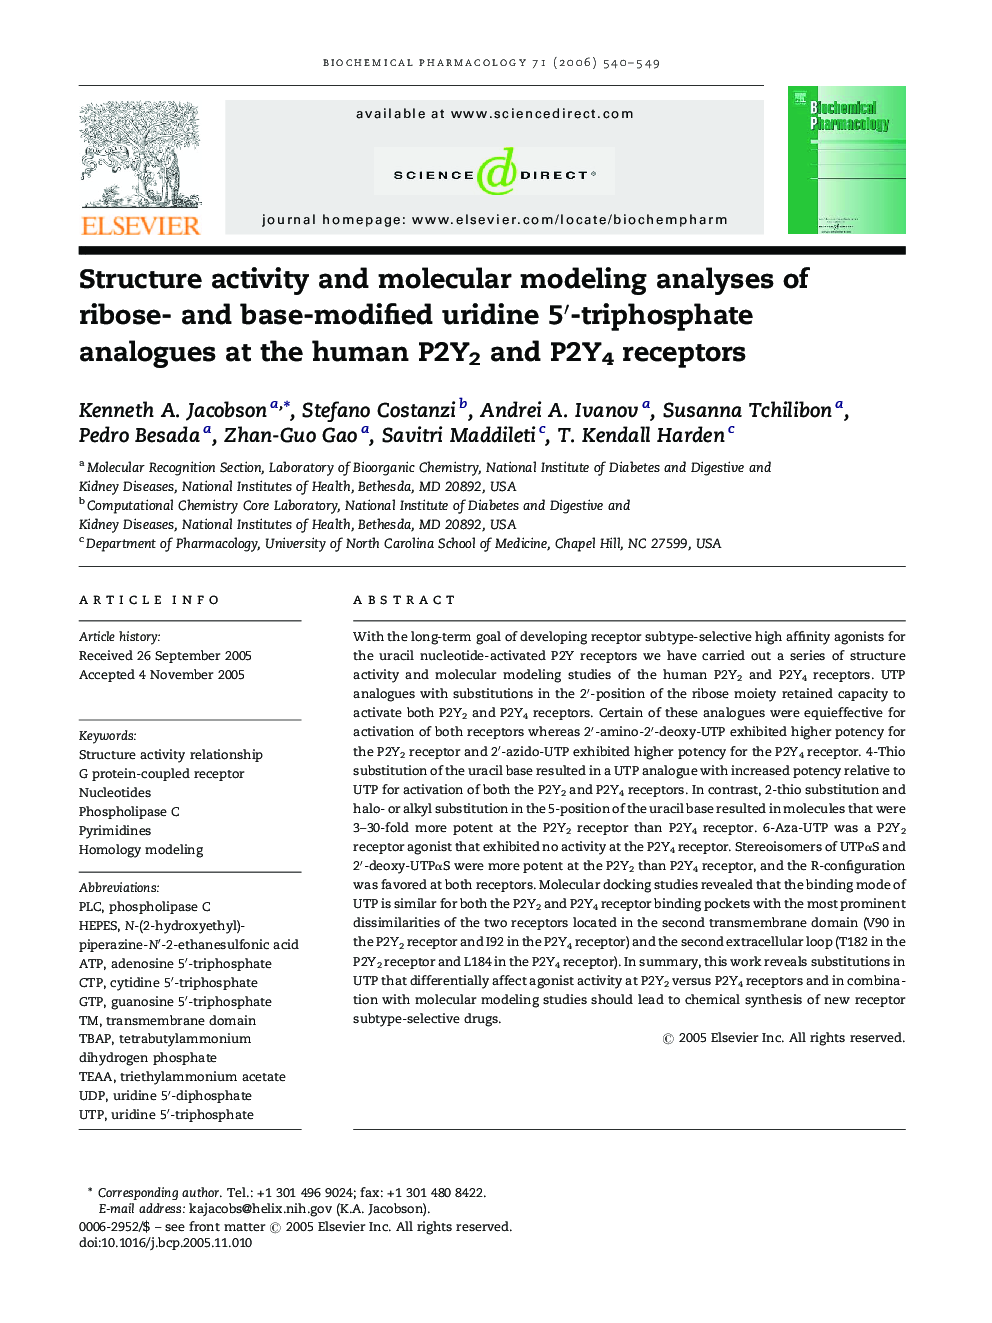 Structure activity and molecular modeling analyses of ribose- and base-modified uridine 5′-triphosphate analogues at the human P2Y2 and P2Y4 receptors